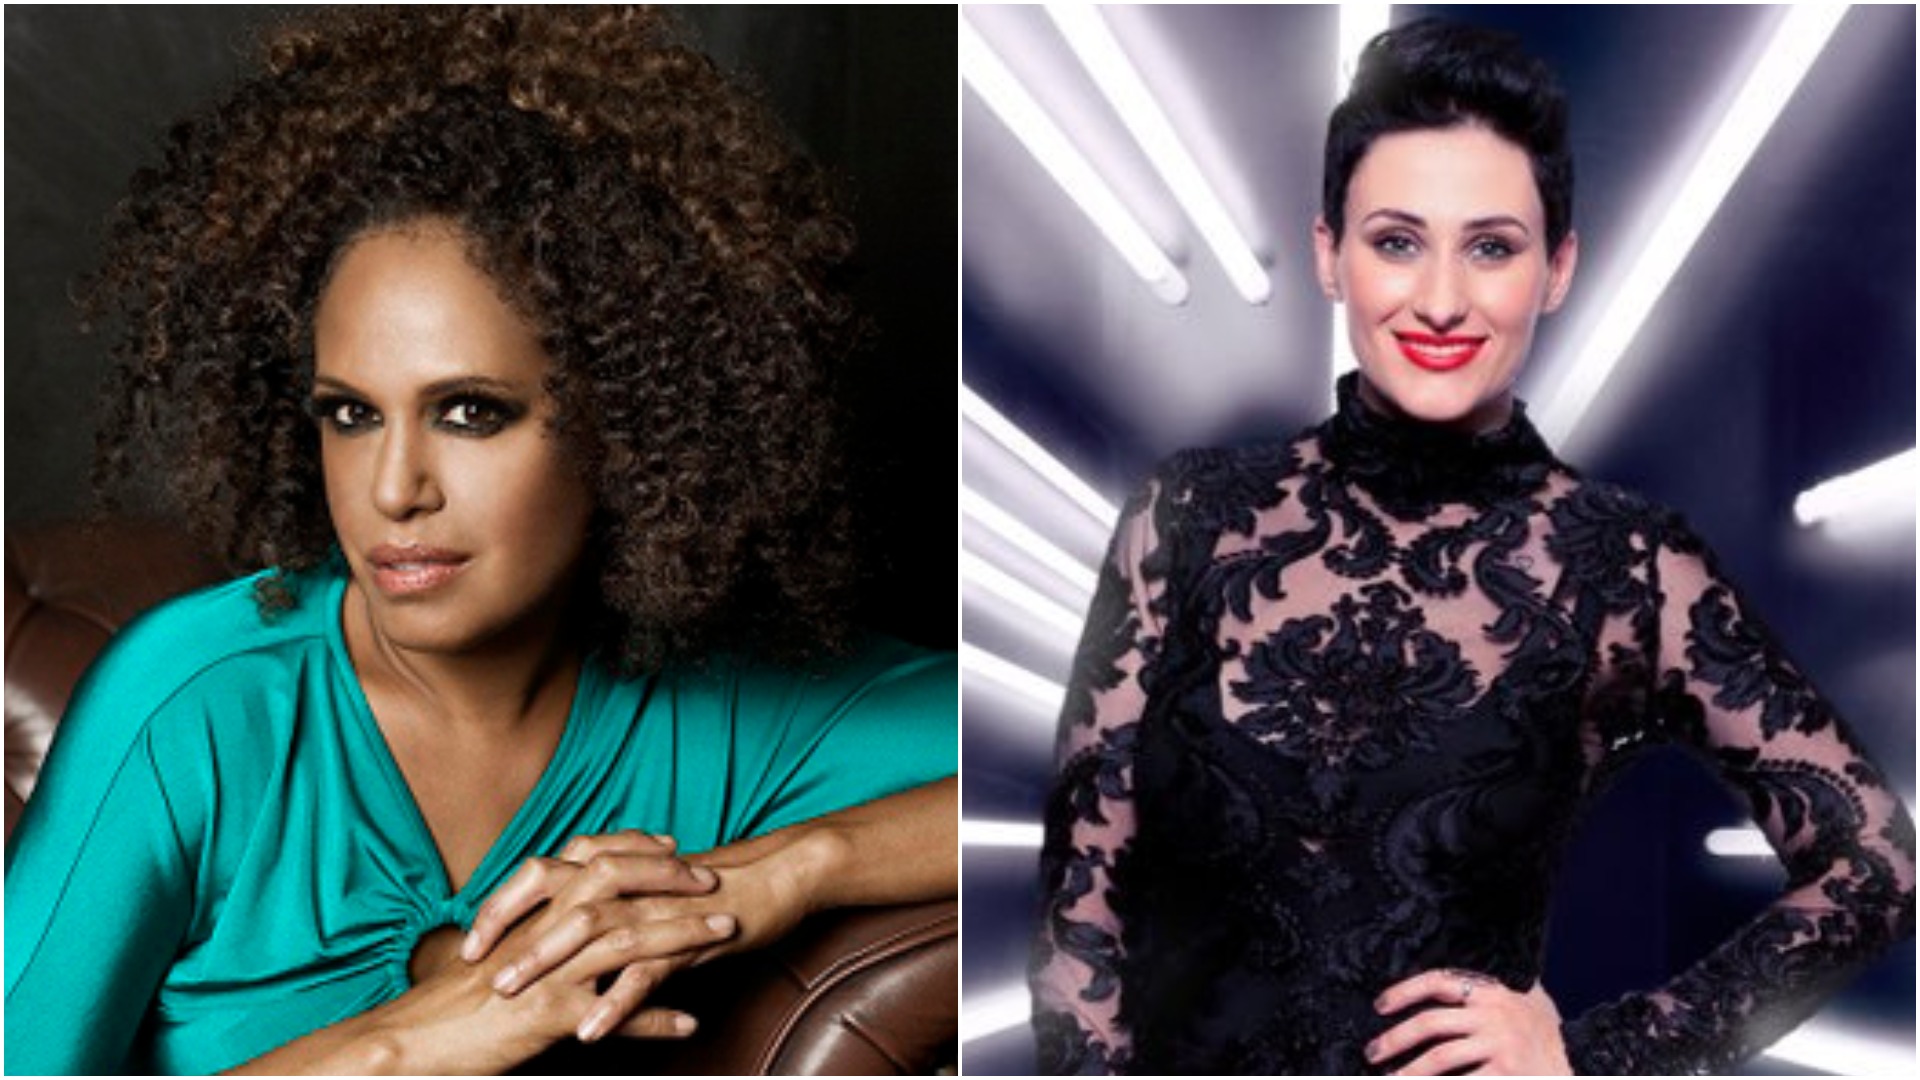 Christine Anu and Diana Rouvas split from long-time managers [exclusive]